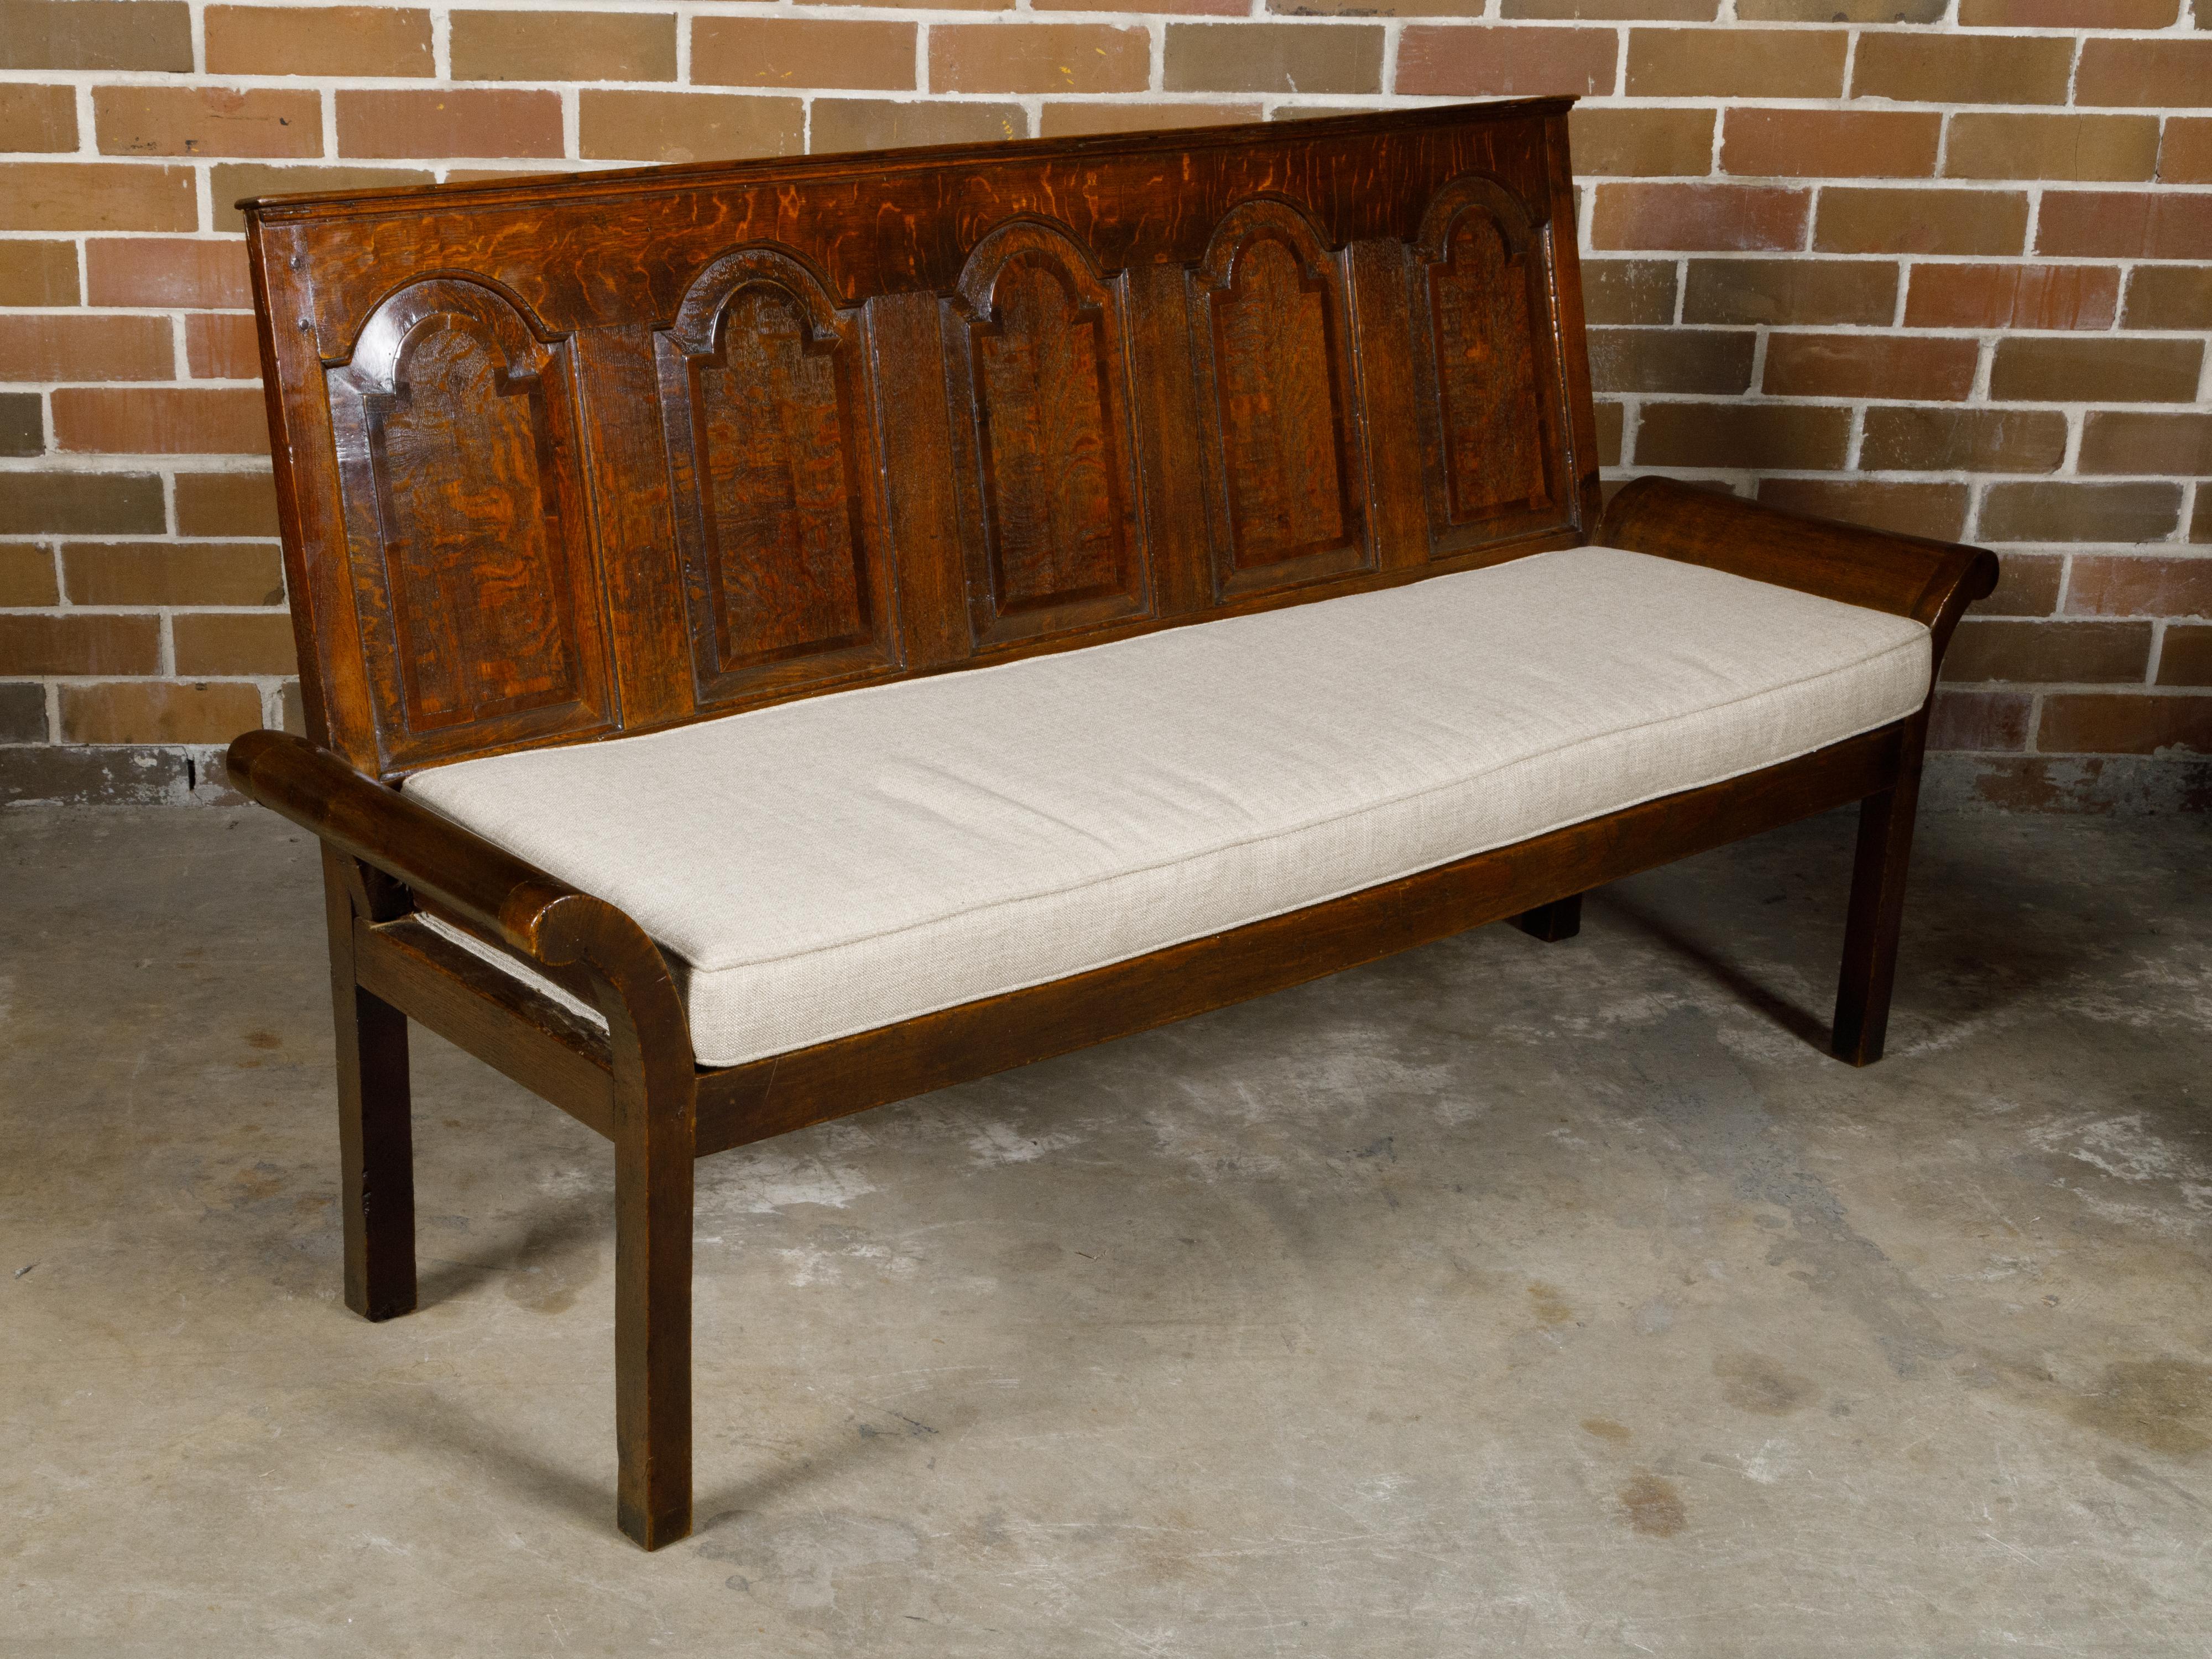 18th Century English Georgian Oak Bench with Carved Back and Custom Upholstery For Sale 4